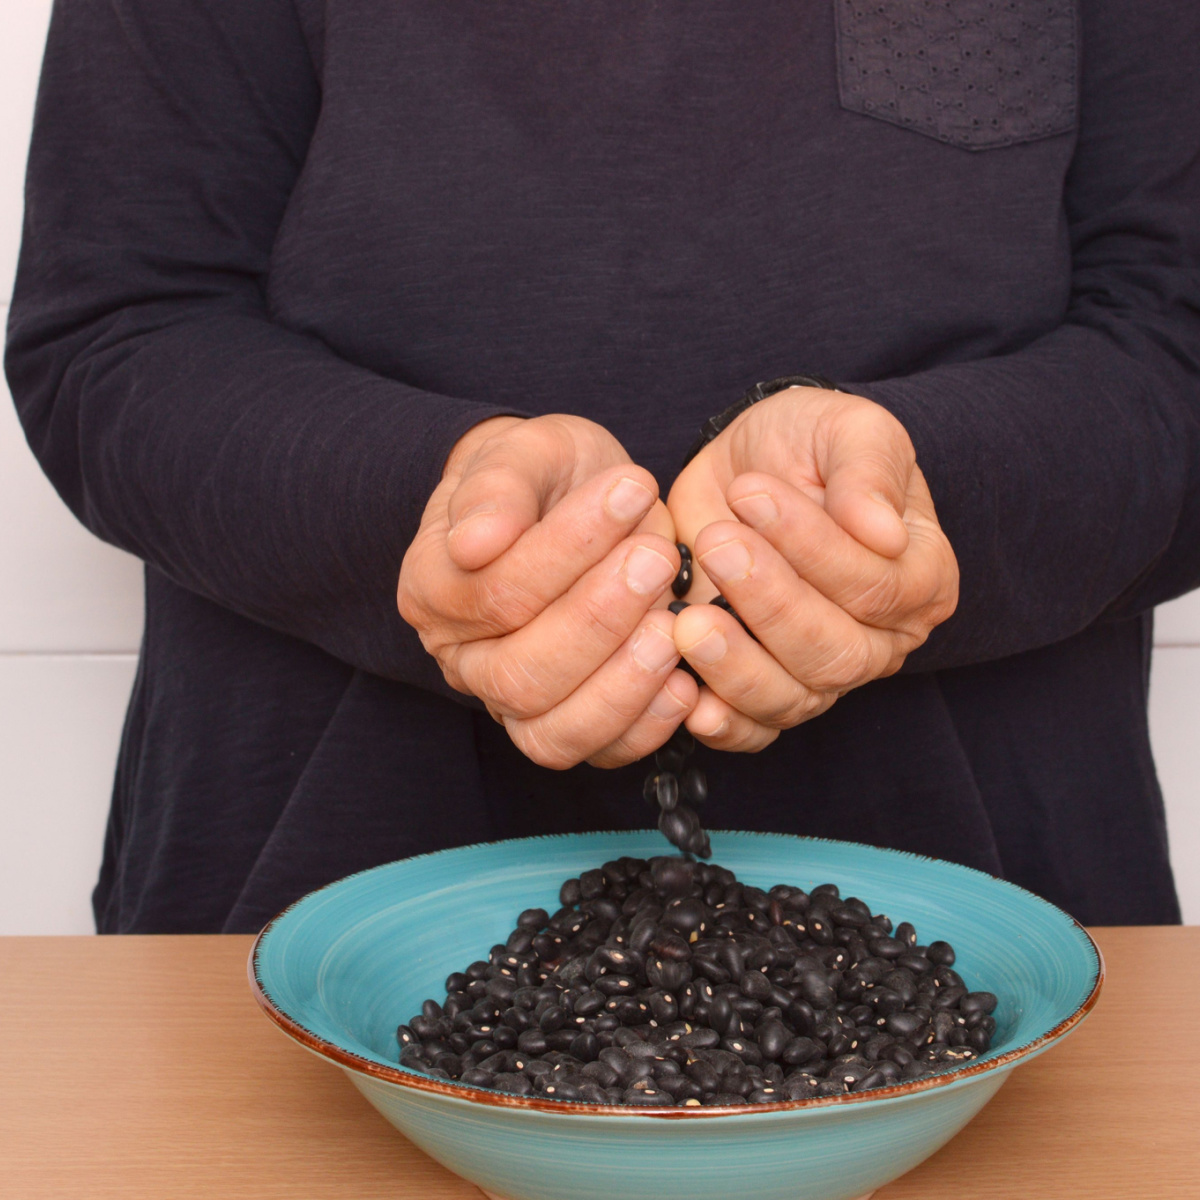 woman adding black beans to bowl in kitchen